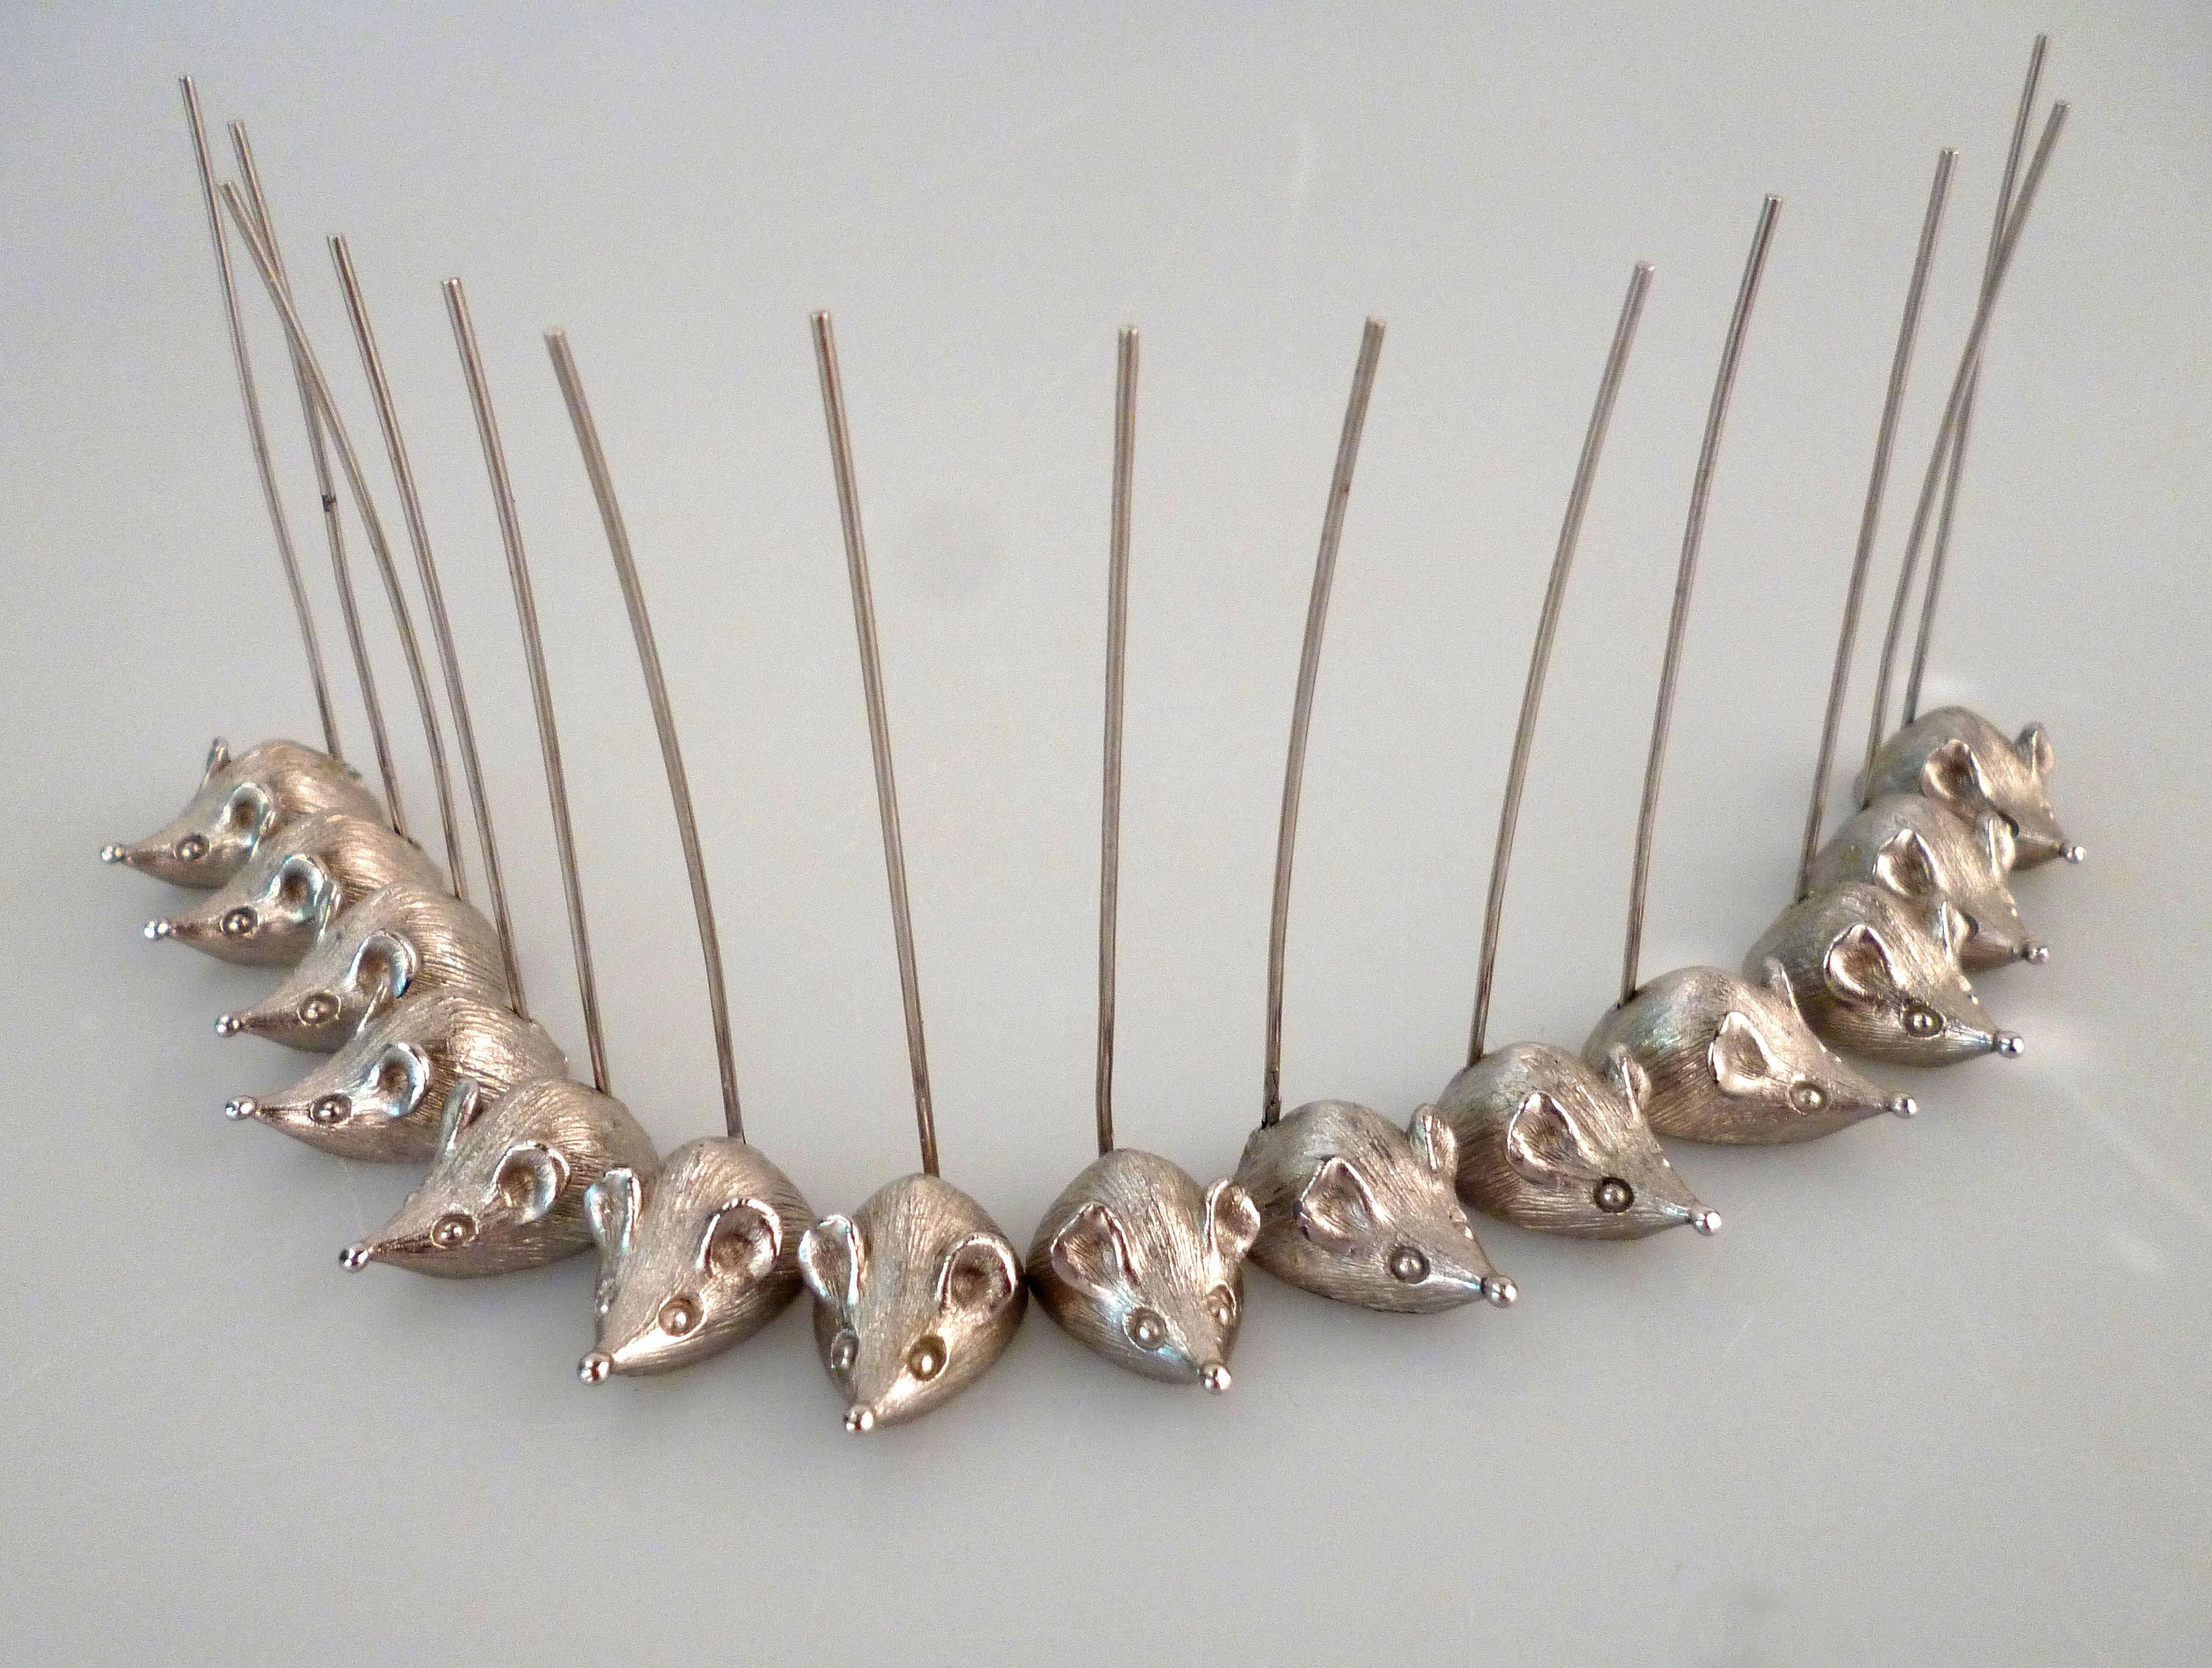 Charming Mid-Century Modern set of fourteen silver metal mice with long tails for skewering cheese or other small appetizers.
Individual Servers for cheese or hors d'oeuvres by Napier.
All are marked on undersides.
What a joyful presentation for